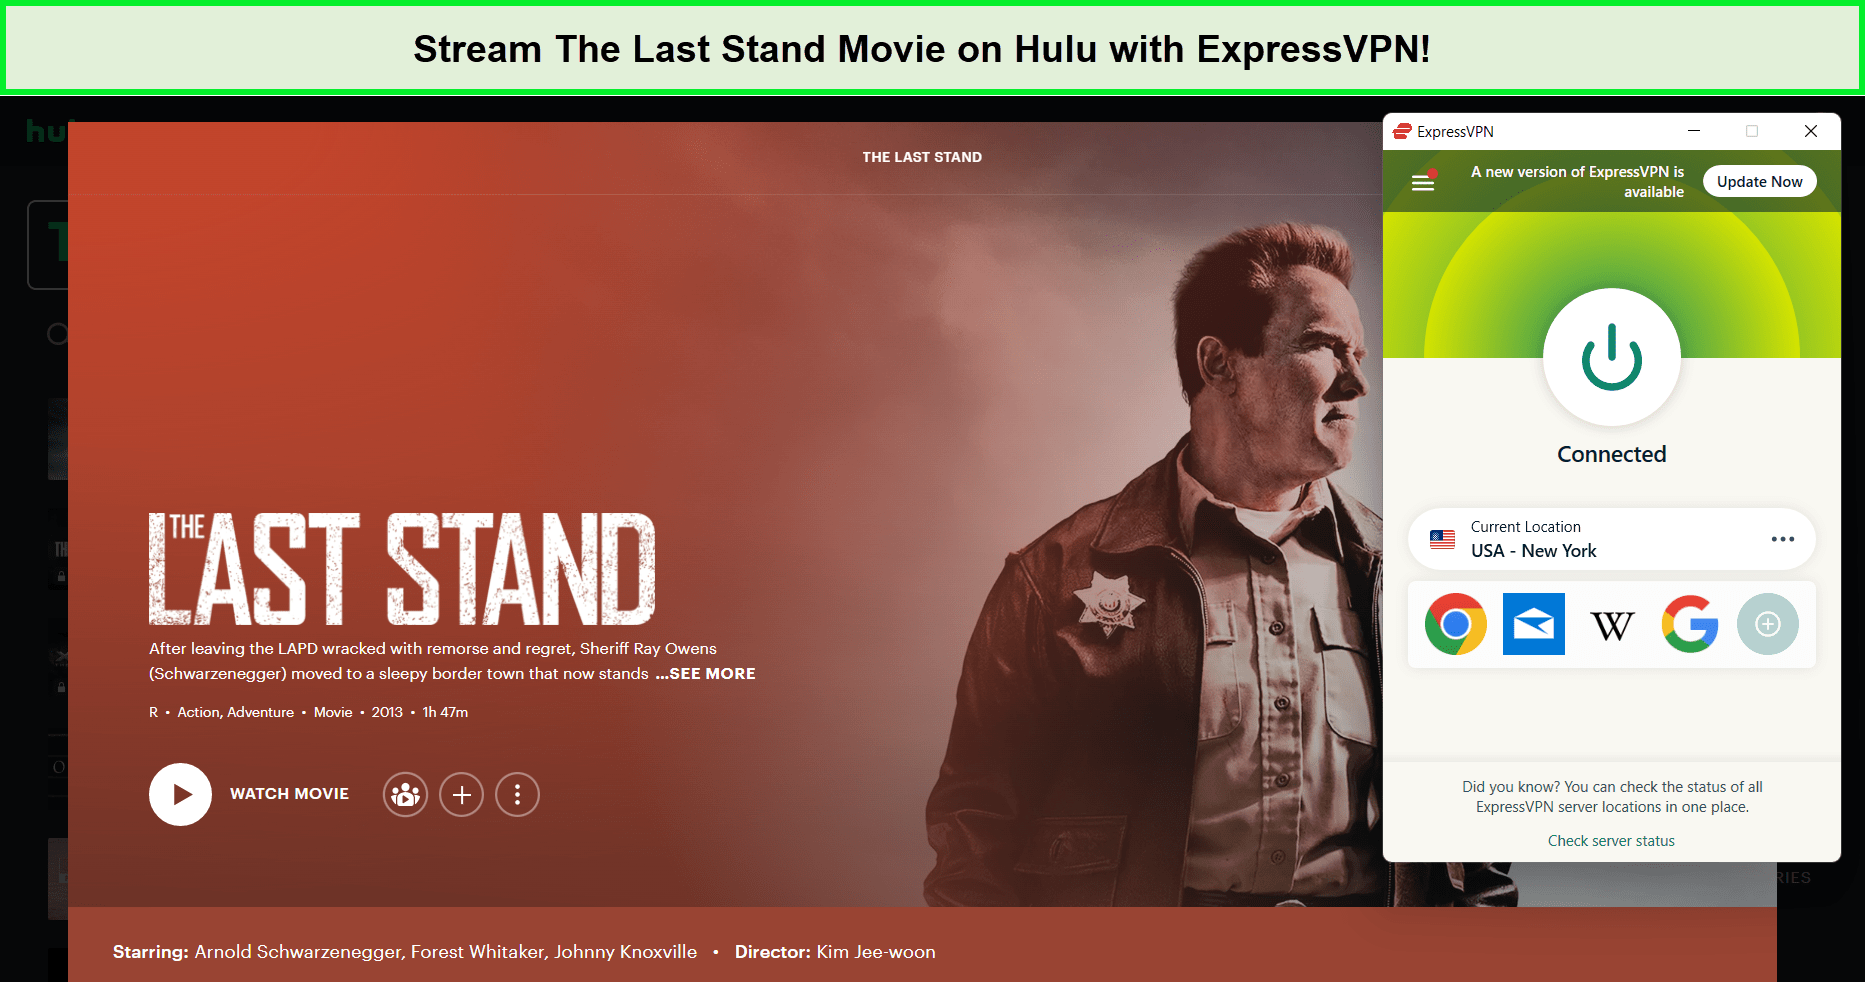 With-ExpressVPN-Watch-The-Last-Stand-Movie-on-Hulu-in-Singapore